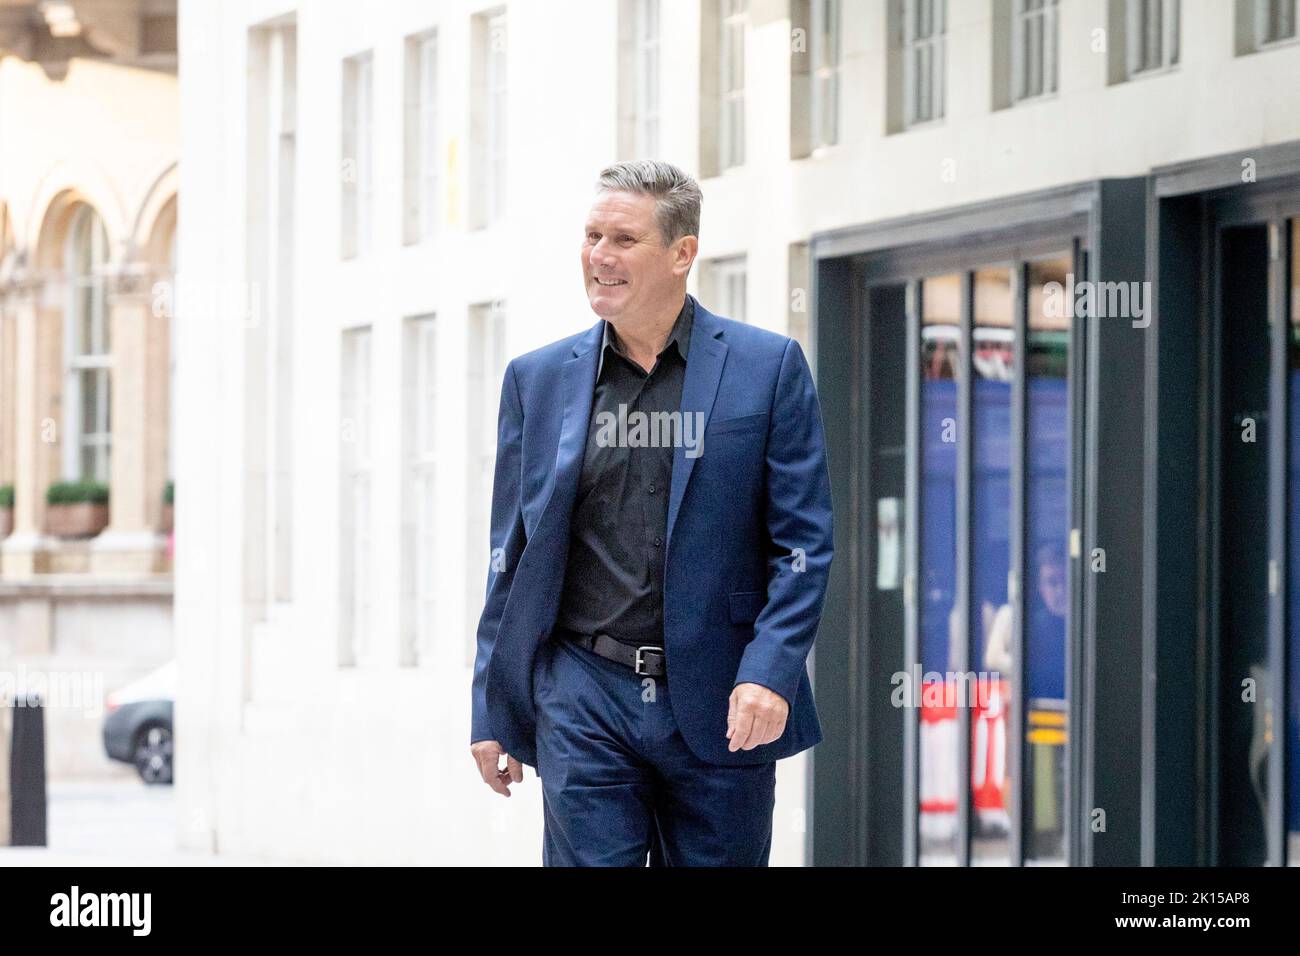 Labour Party leader Sir Keir Starmer appears at BBC studios this morning.   Image shot on 1st Sep 2022.  © Belinda Jiao   jiao.bilin@gmail.com 0759893 Stock Photo